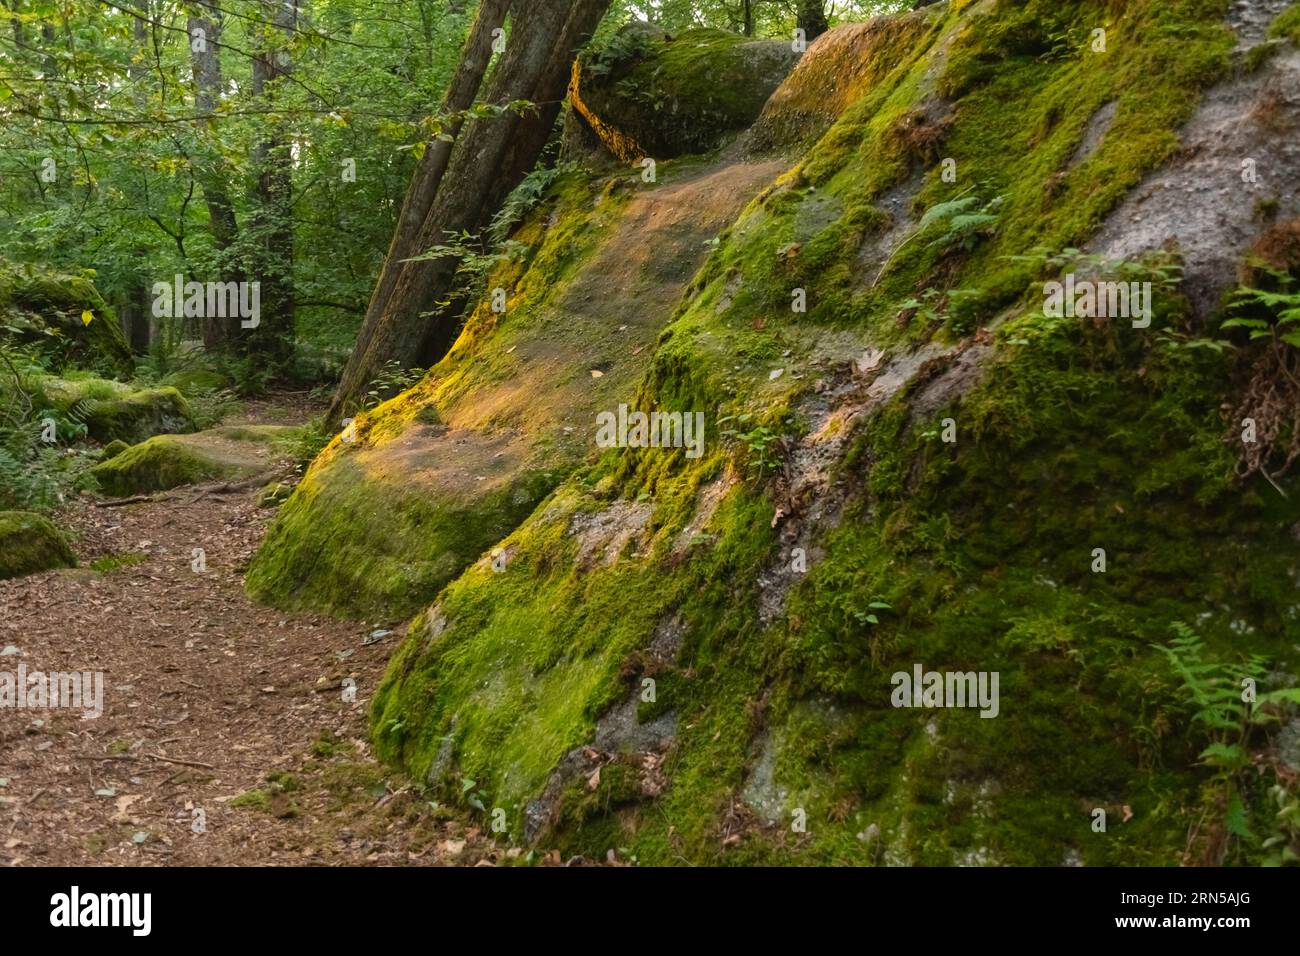 Lush forest background park land copy space backgrounds Stock Photo